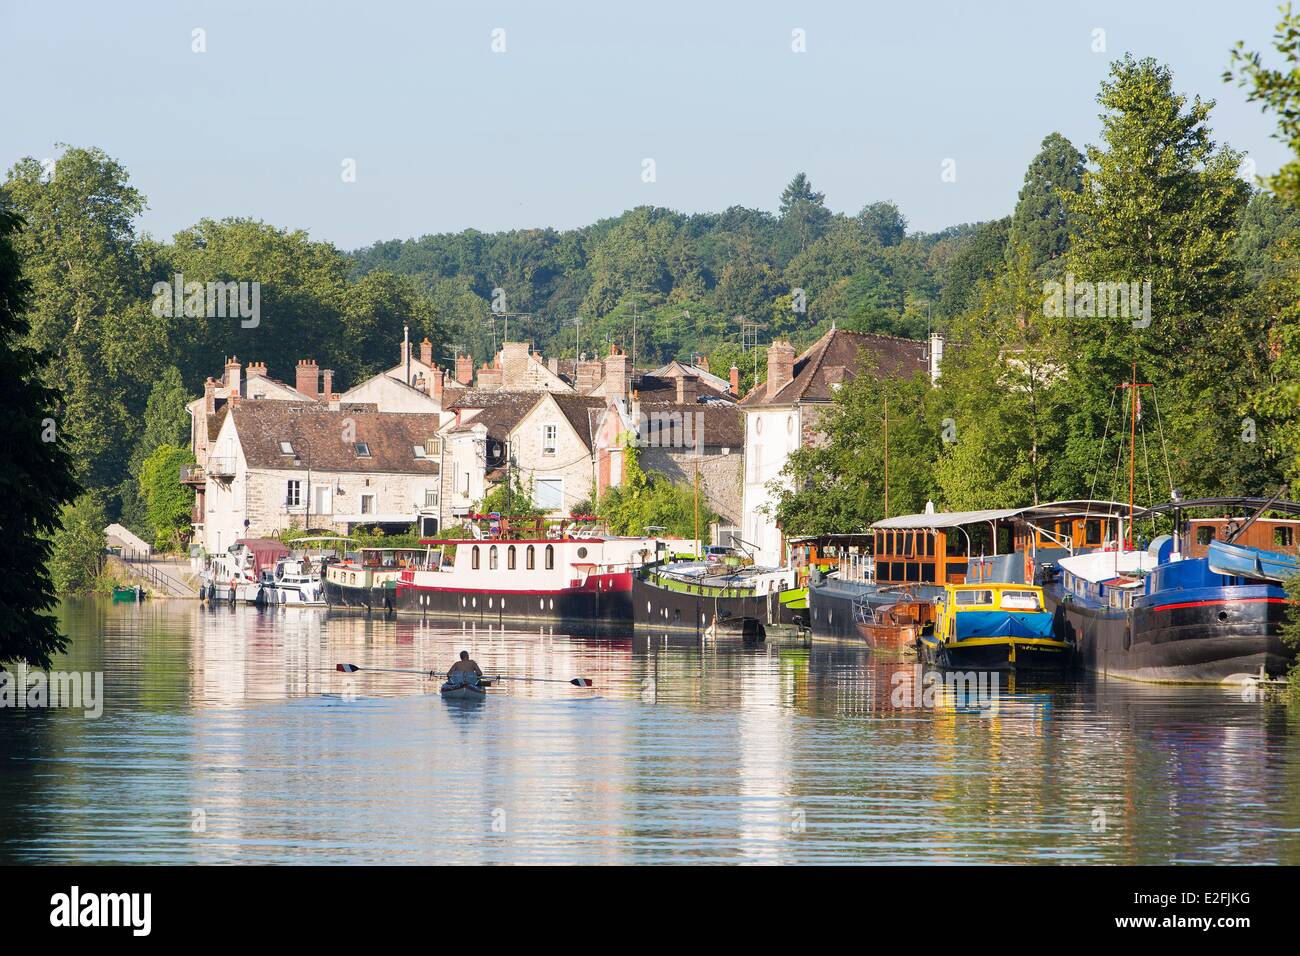 France Seine et Marne Samois sur Seine man rowing flat boats moored at wharf on the Seine river and village in the background Stock Photo